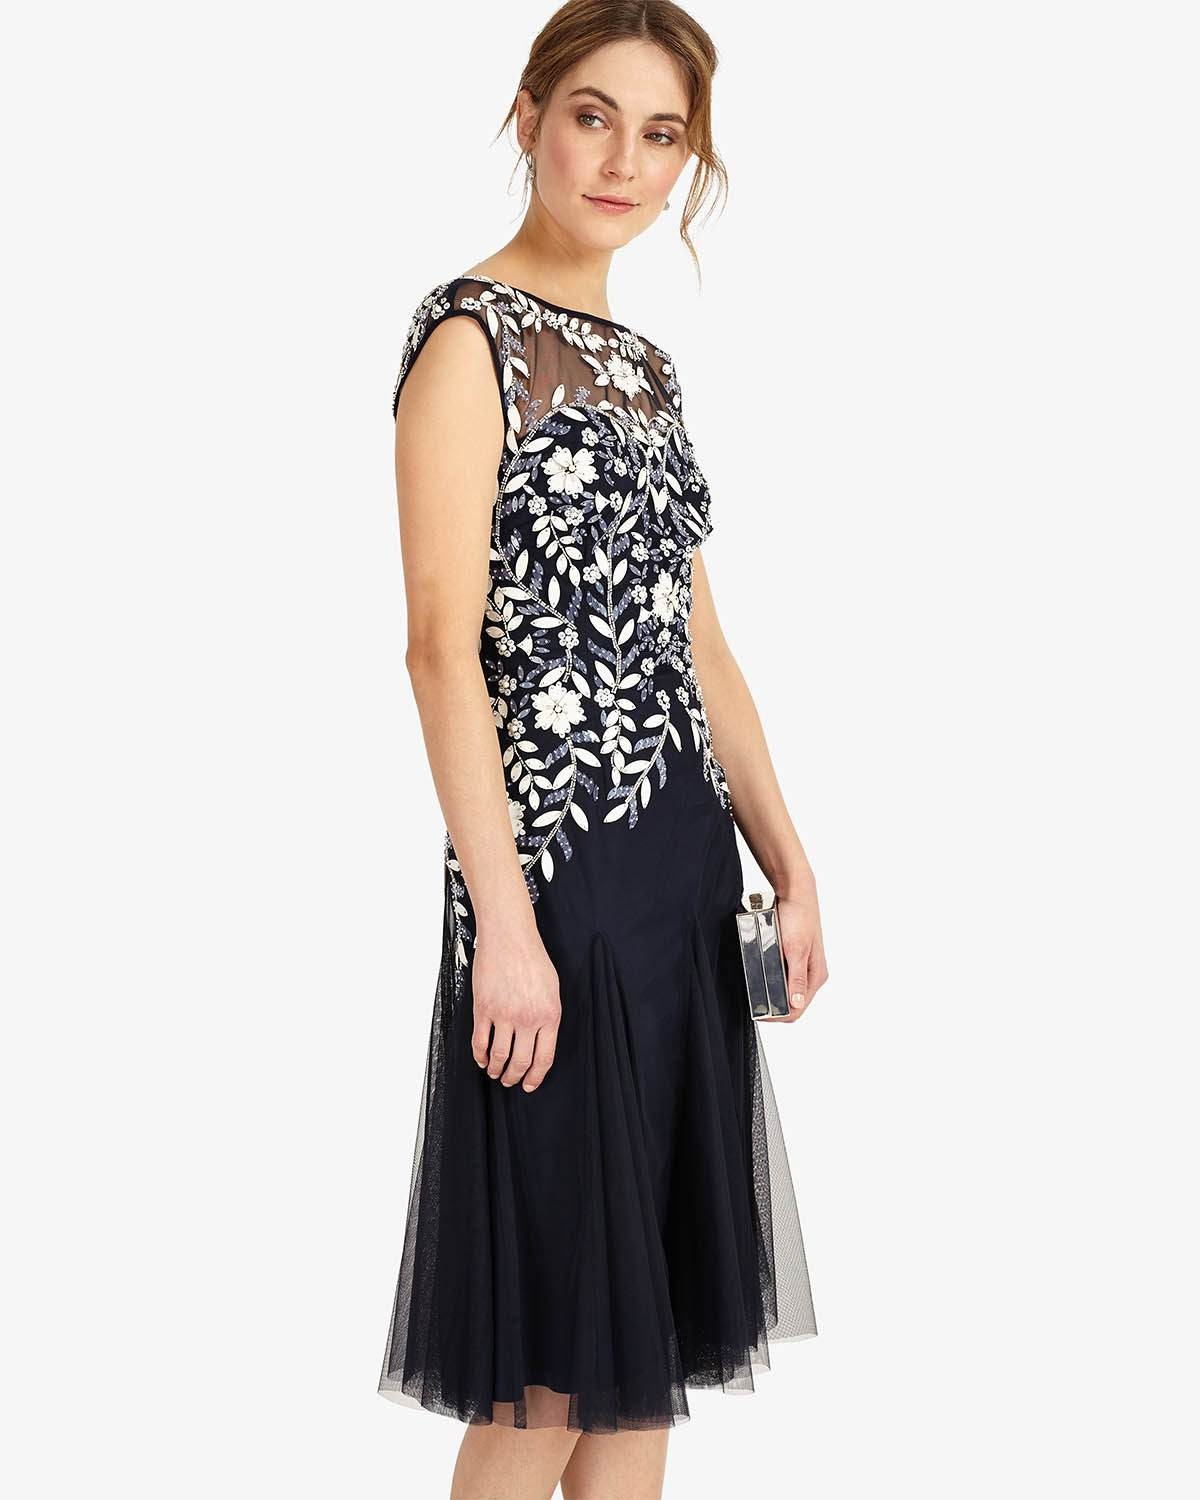 Phase Eight Dresses Top Sellers, 54% OFF | lagence.tv